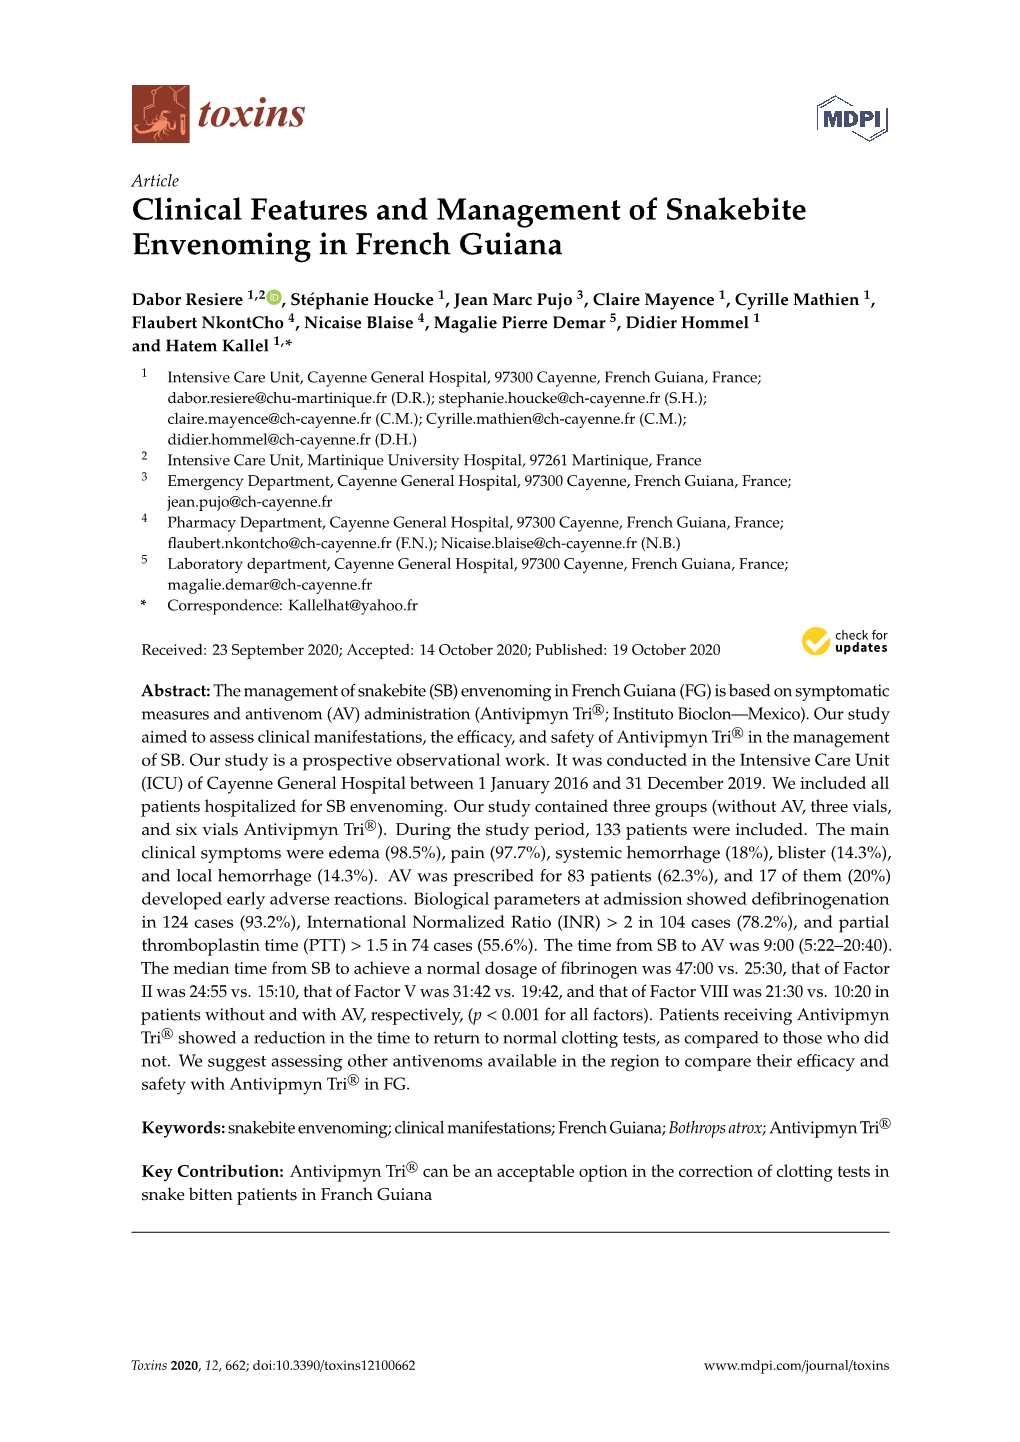 Clinical Features and Management of Snakebite Envenoming in French Guiana